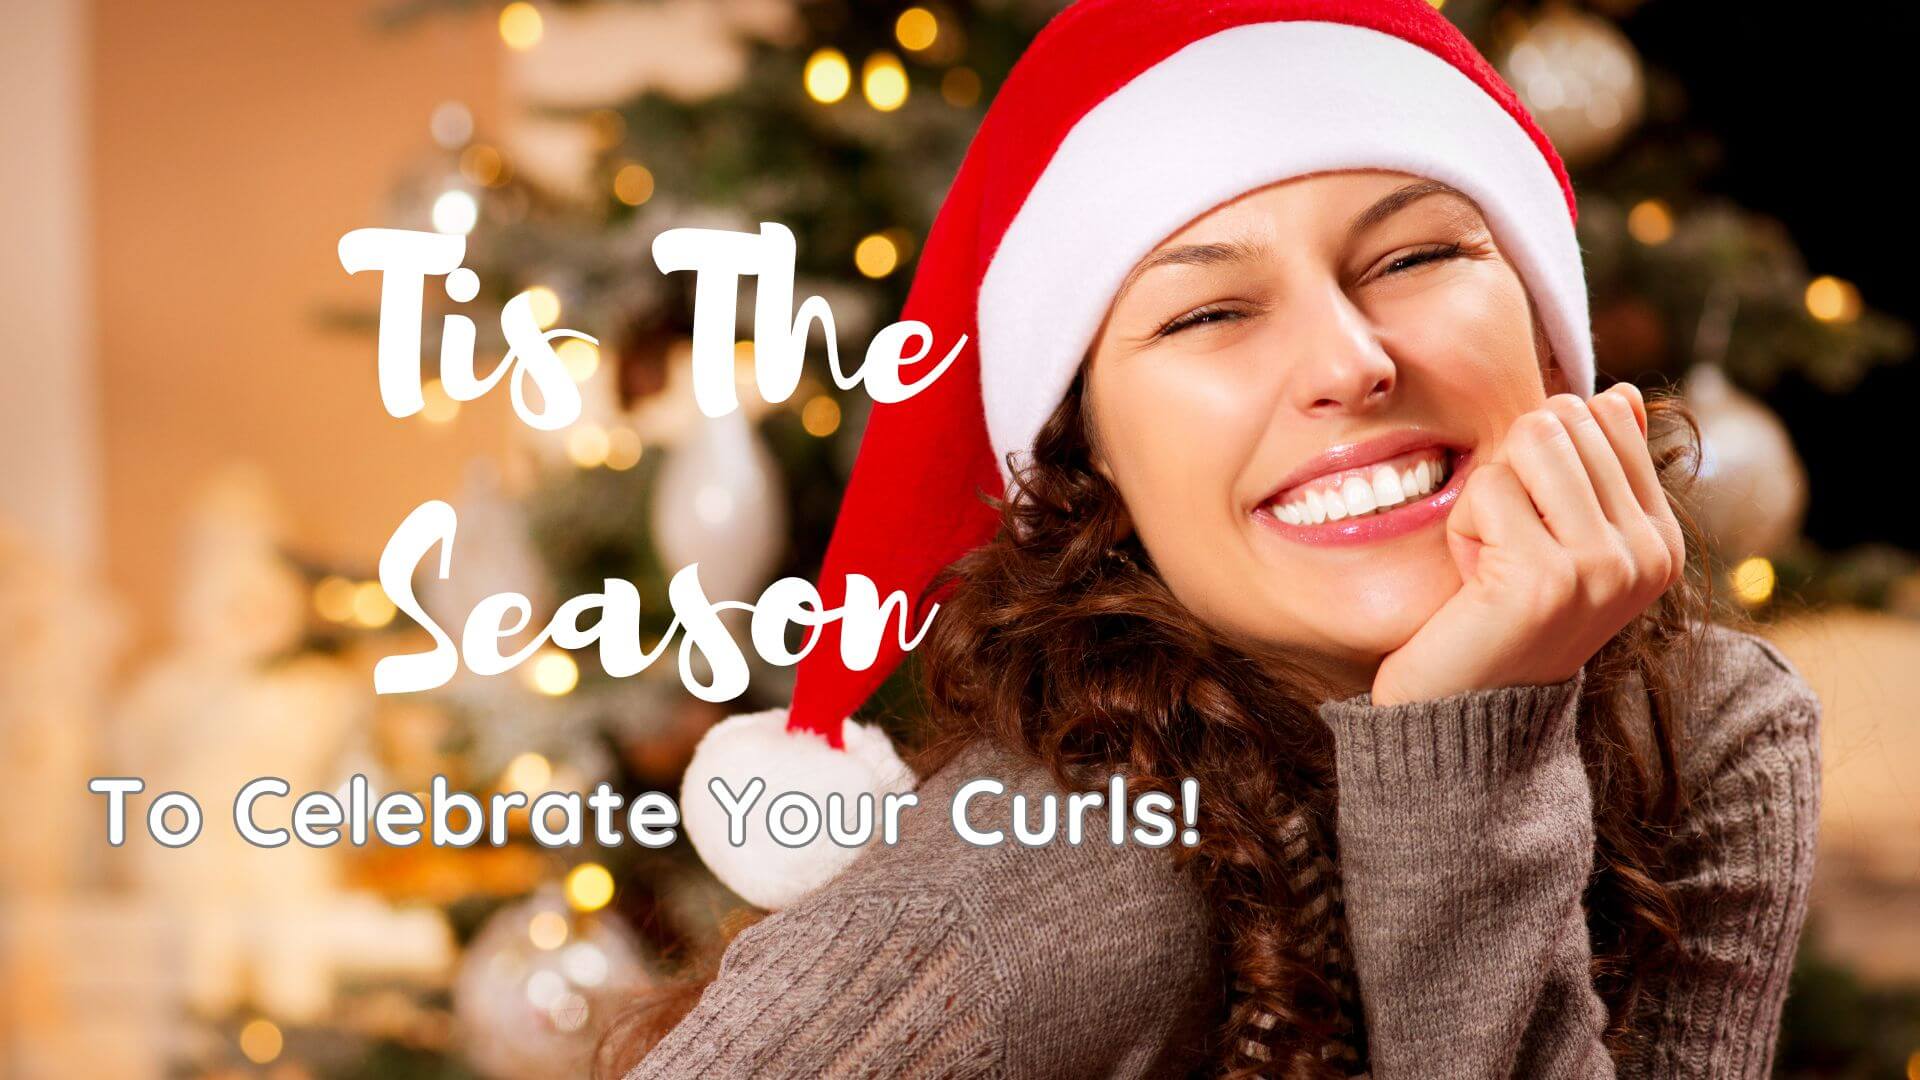 Celebrating your Christmas Curls